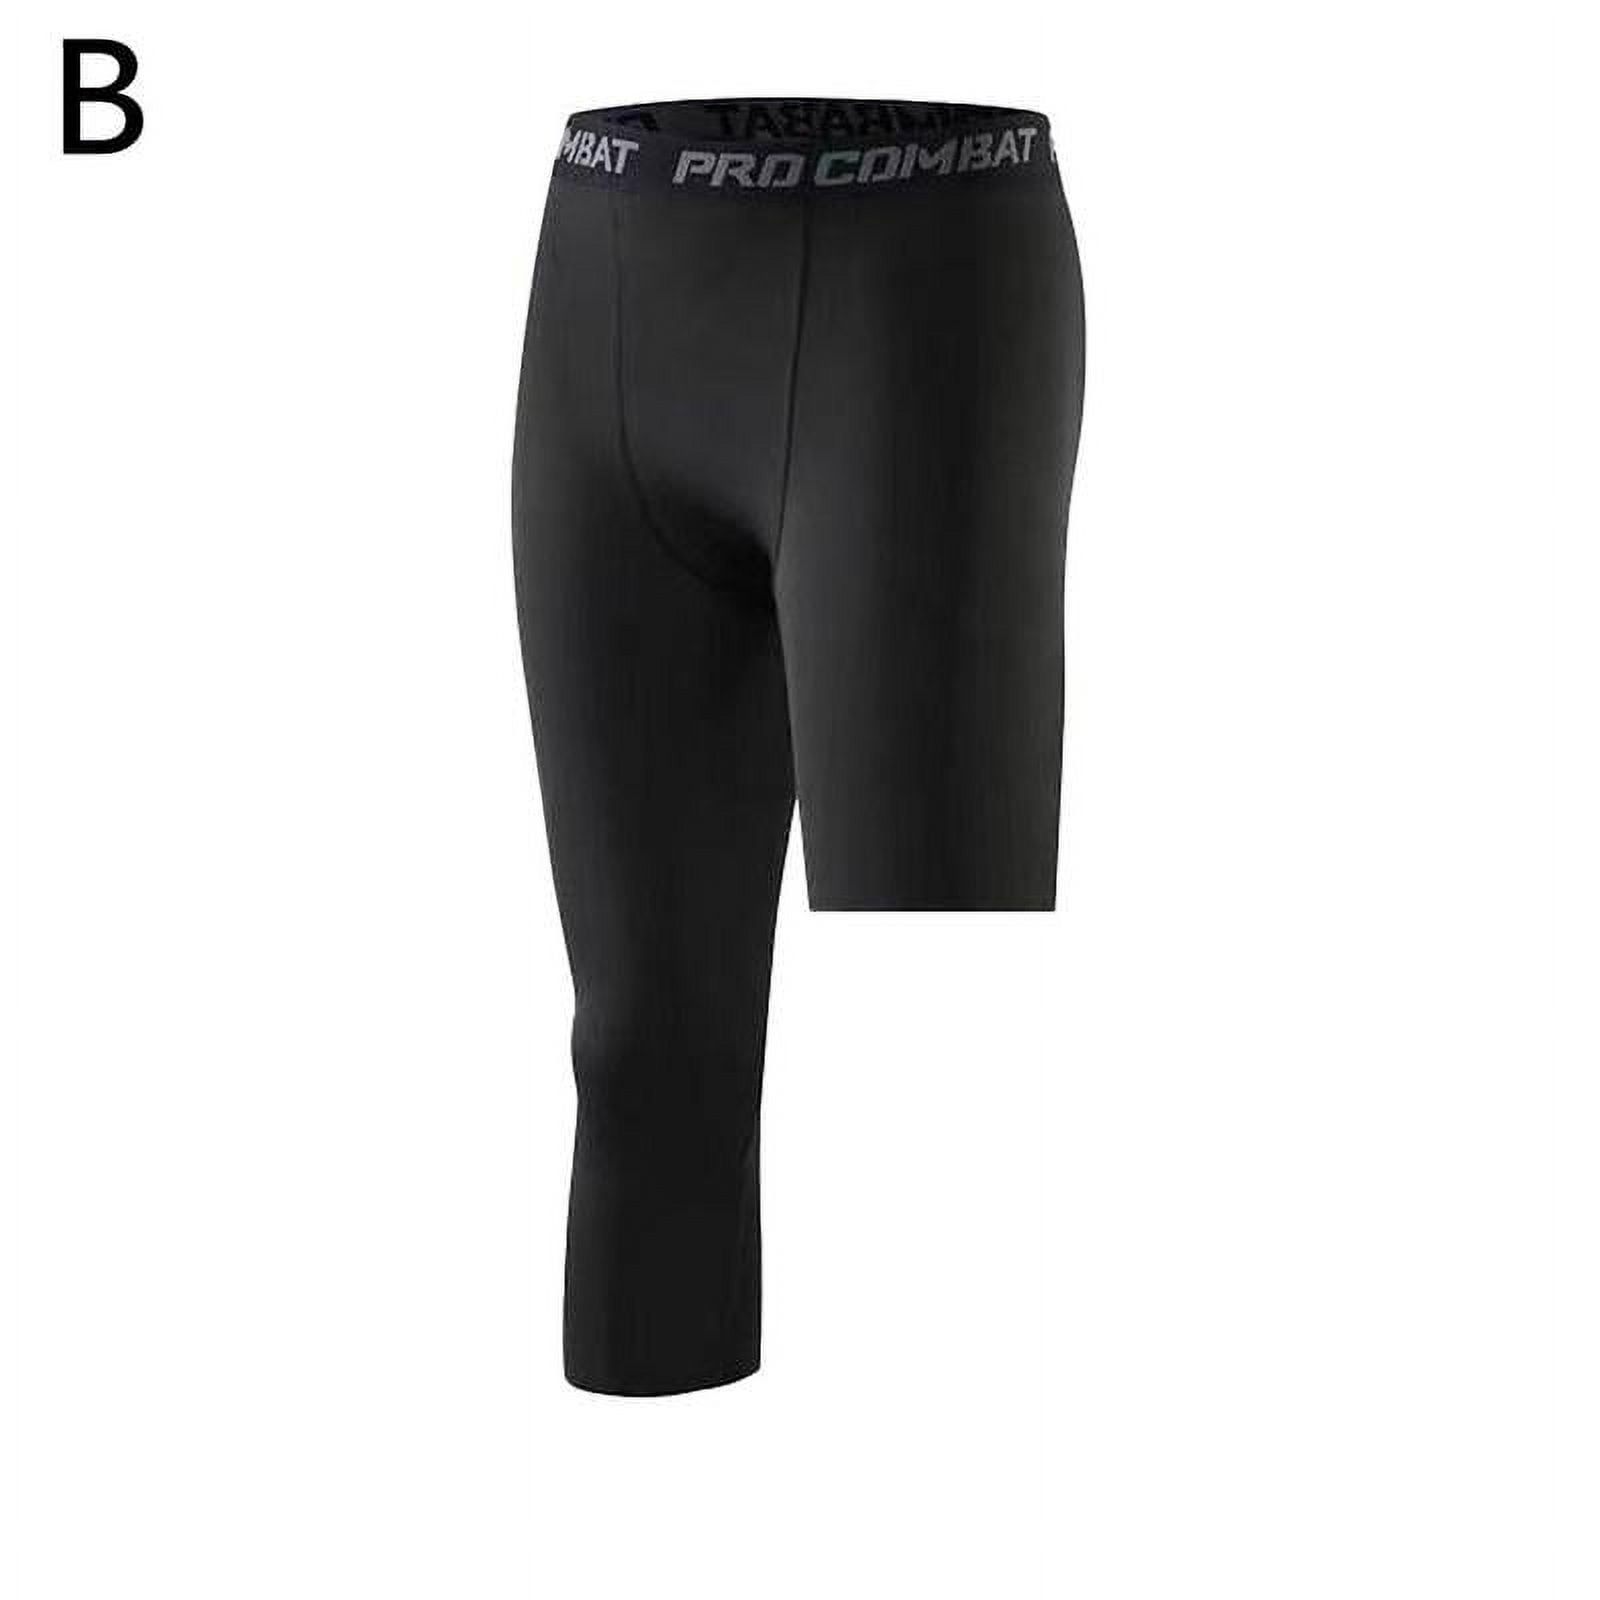 3/4 Compression Pants/Tights - Navy Blue – Bucwild Sports